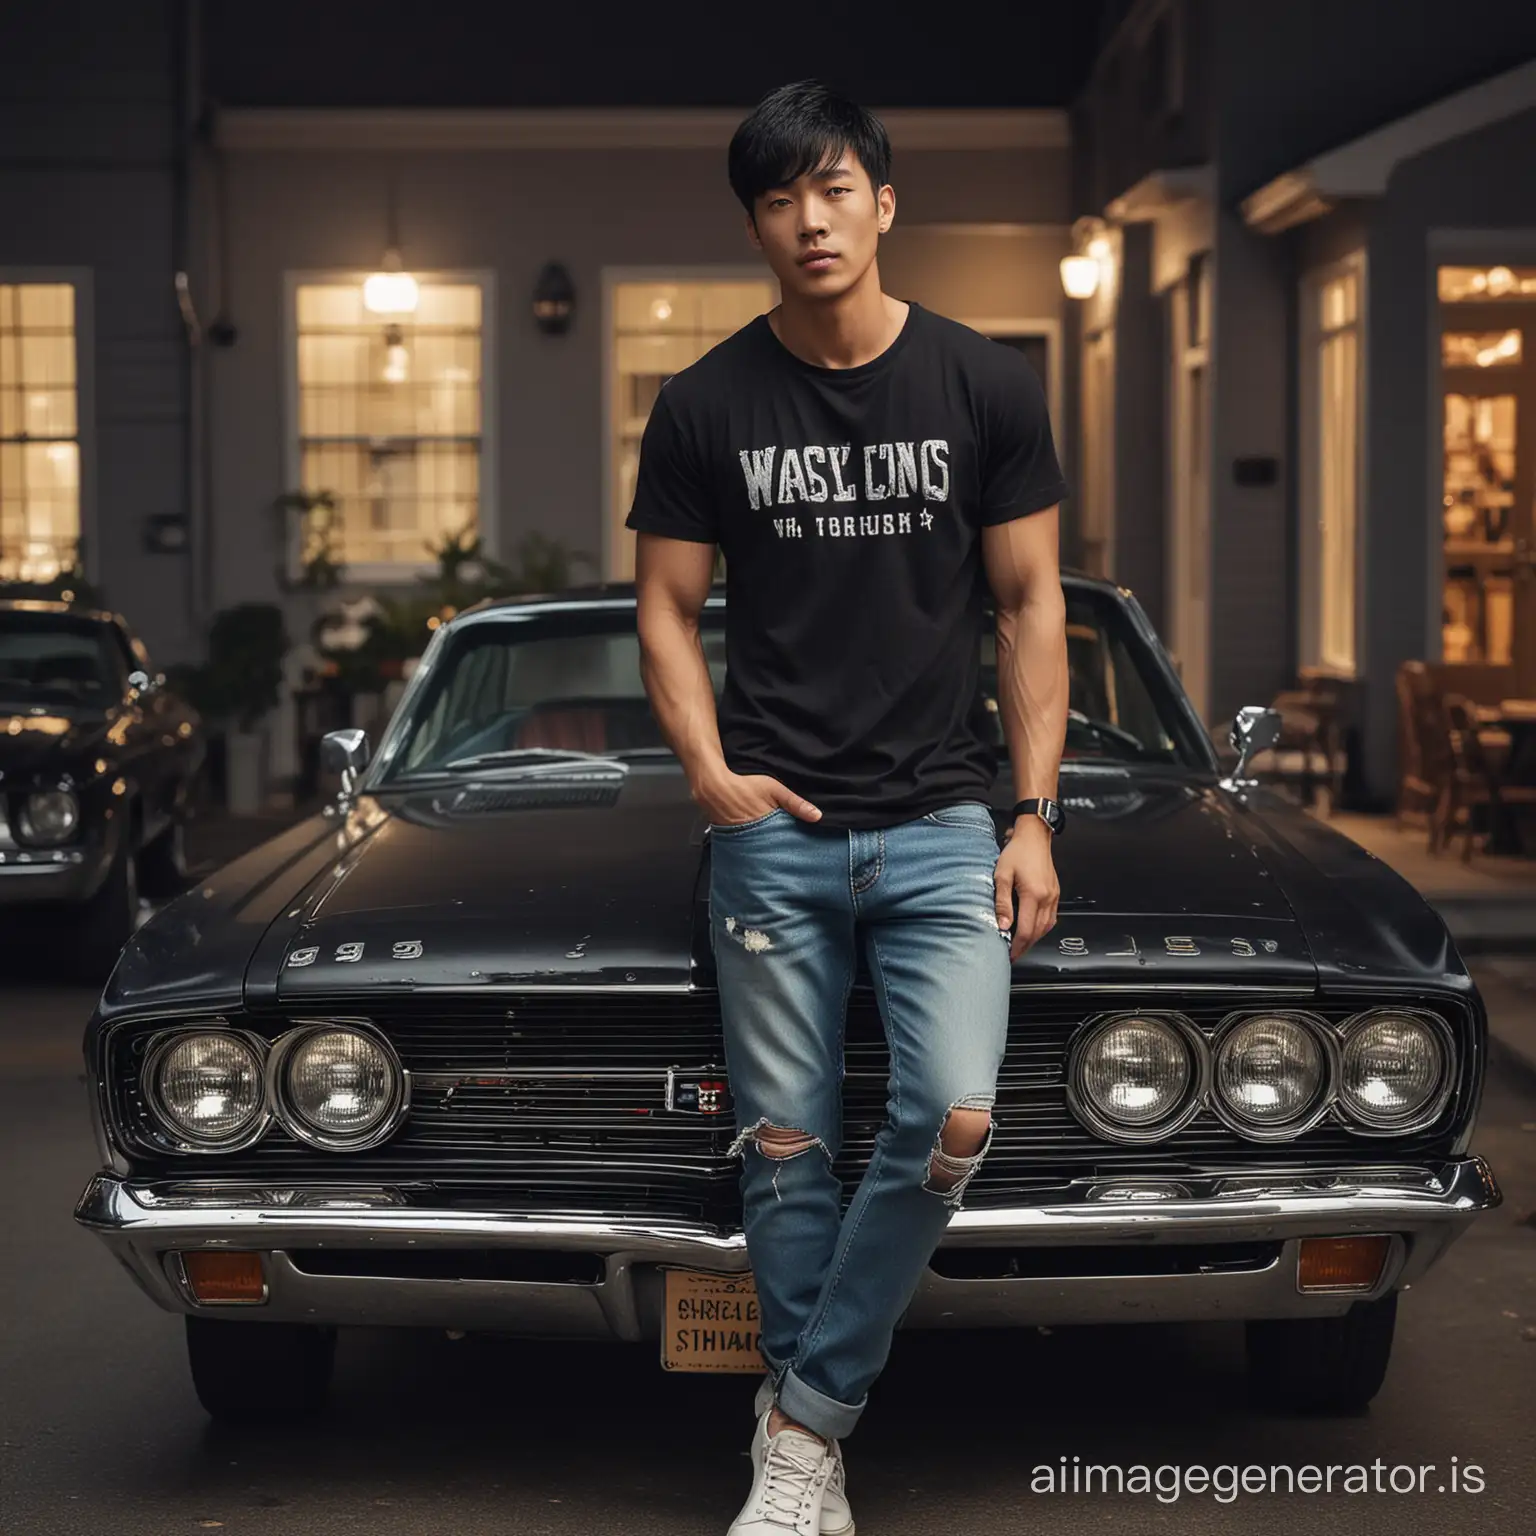 A captivating photograph featuring a stylish Asian man stand casually in the night in front of classic muscle car, embodying a perfect mix of poise and relaxation. His short black hair, elegantly styled with bangs framing his warm hazel eyes, enhances his overall charm and appeal. Dressed in a trendy t-shirt, distressed denim jeans, and fashionable sneakers, he radiates a laid-back coolness that is both inviting and effortlessly chic. This scene, shot from a top view perspective using a Hasselblad X2D camera, is ideal for capturing the fashionable lifestyle and relaxed atmosphere of a nighttime setting under the warm glow of a night lamp. No defects